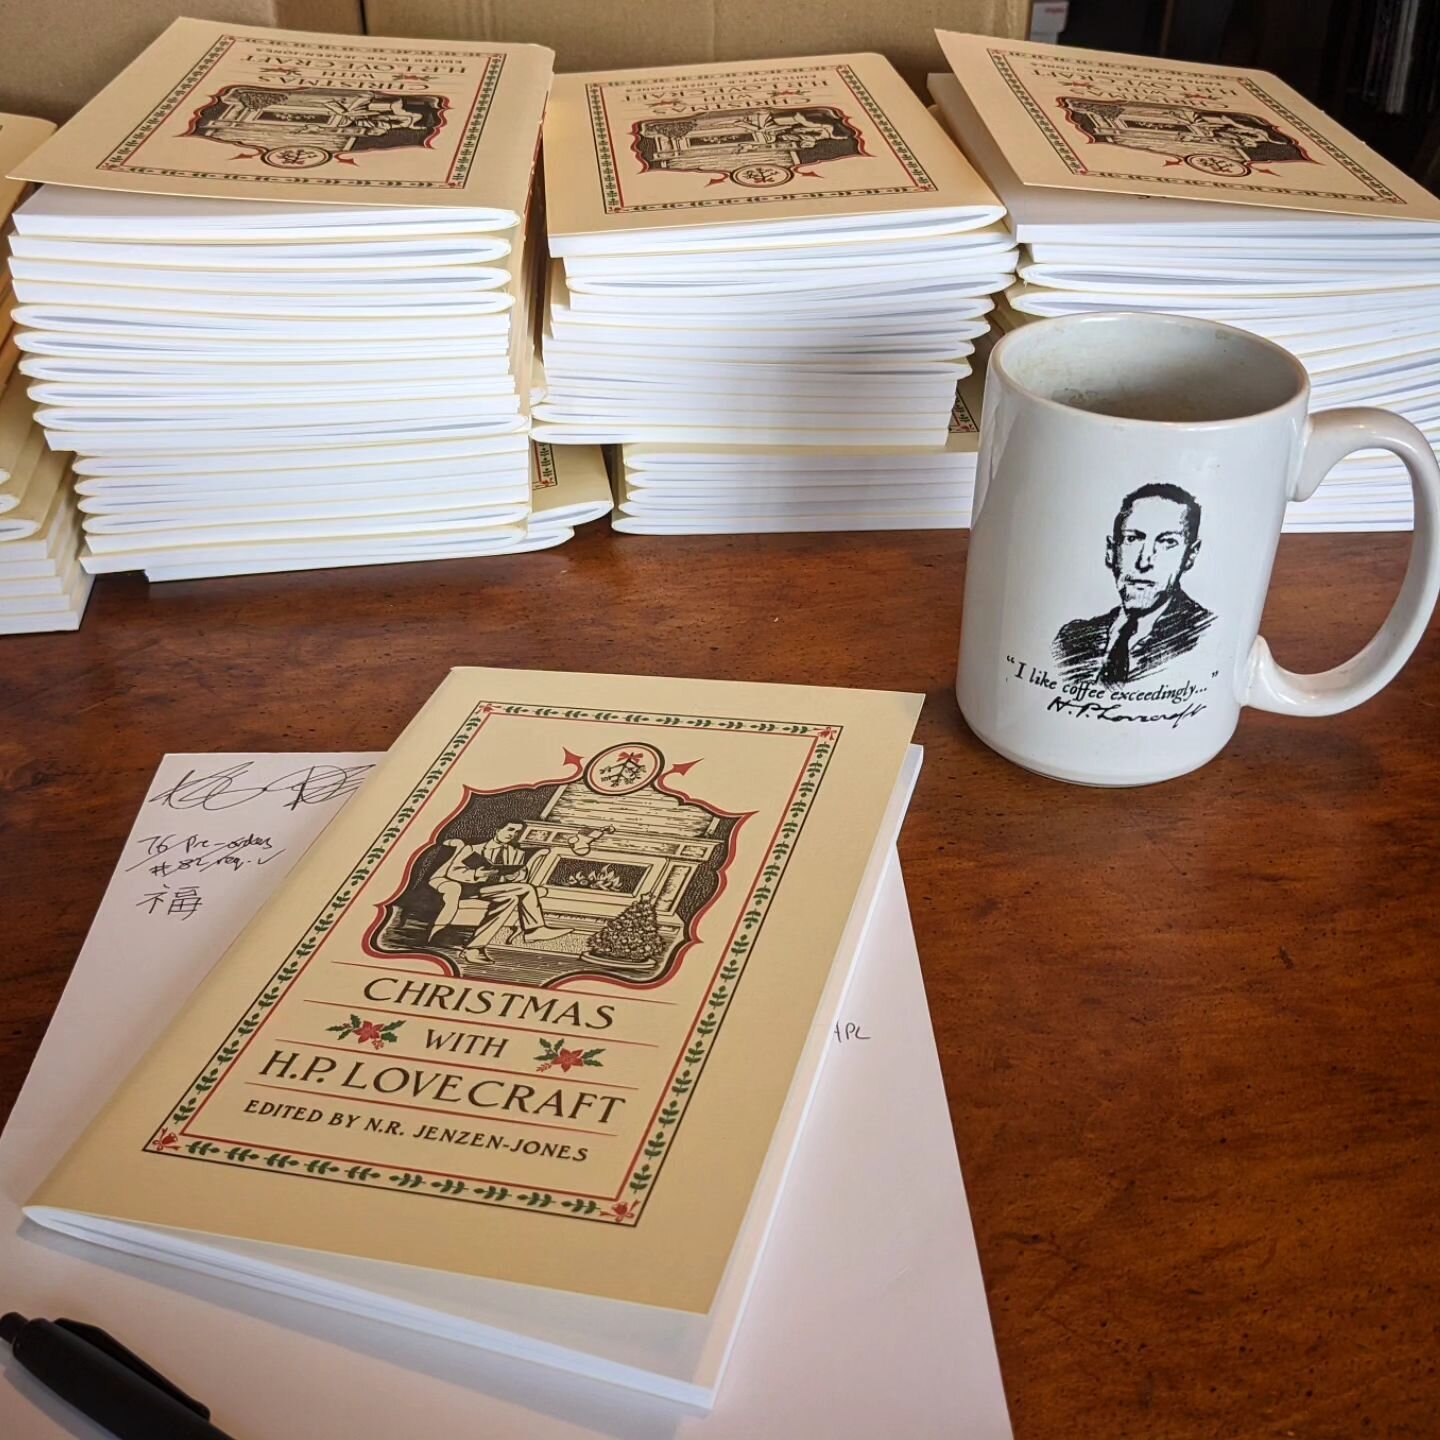 N.R. Jenzen-Jones is signing his &lsquo; &lsquo;Christmas with H.P. Lovecraft&rsquo; books at the H.P. Lovecraft Historical Society headquarters today. Congratulations to Nailah for being the first physical retail customer!